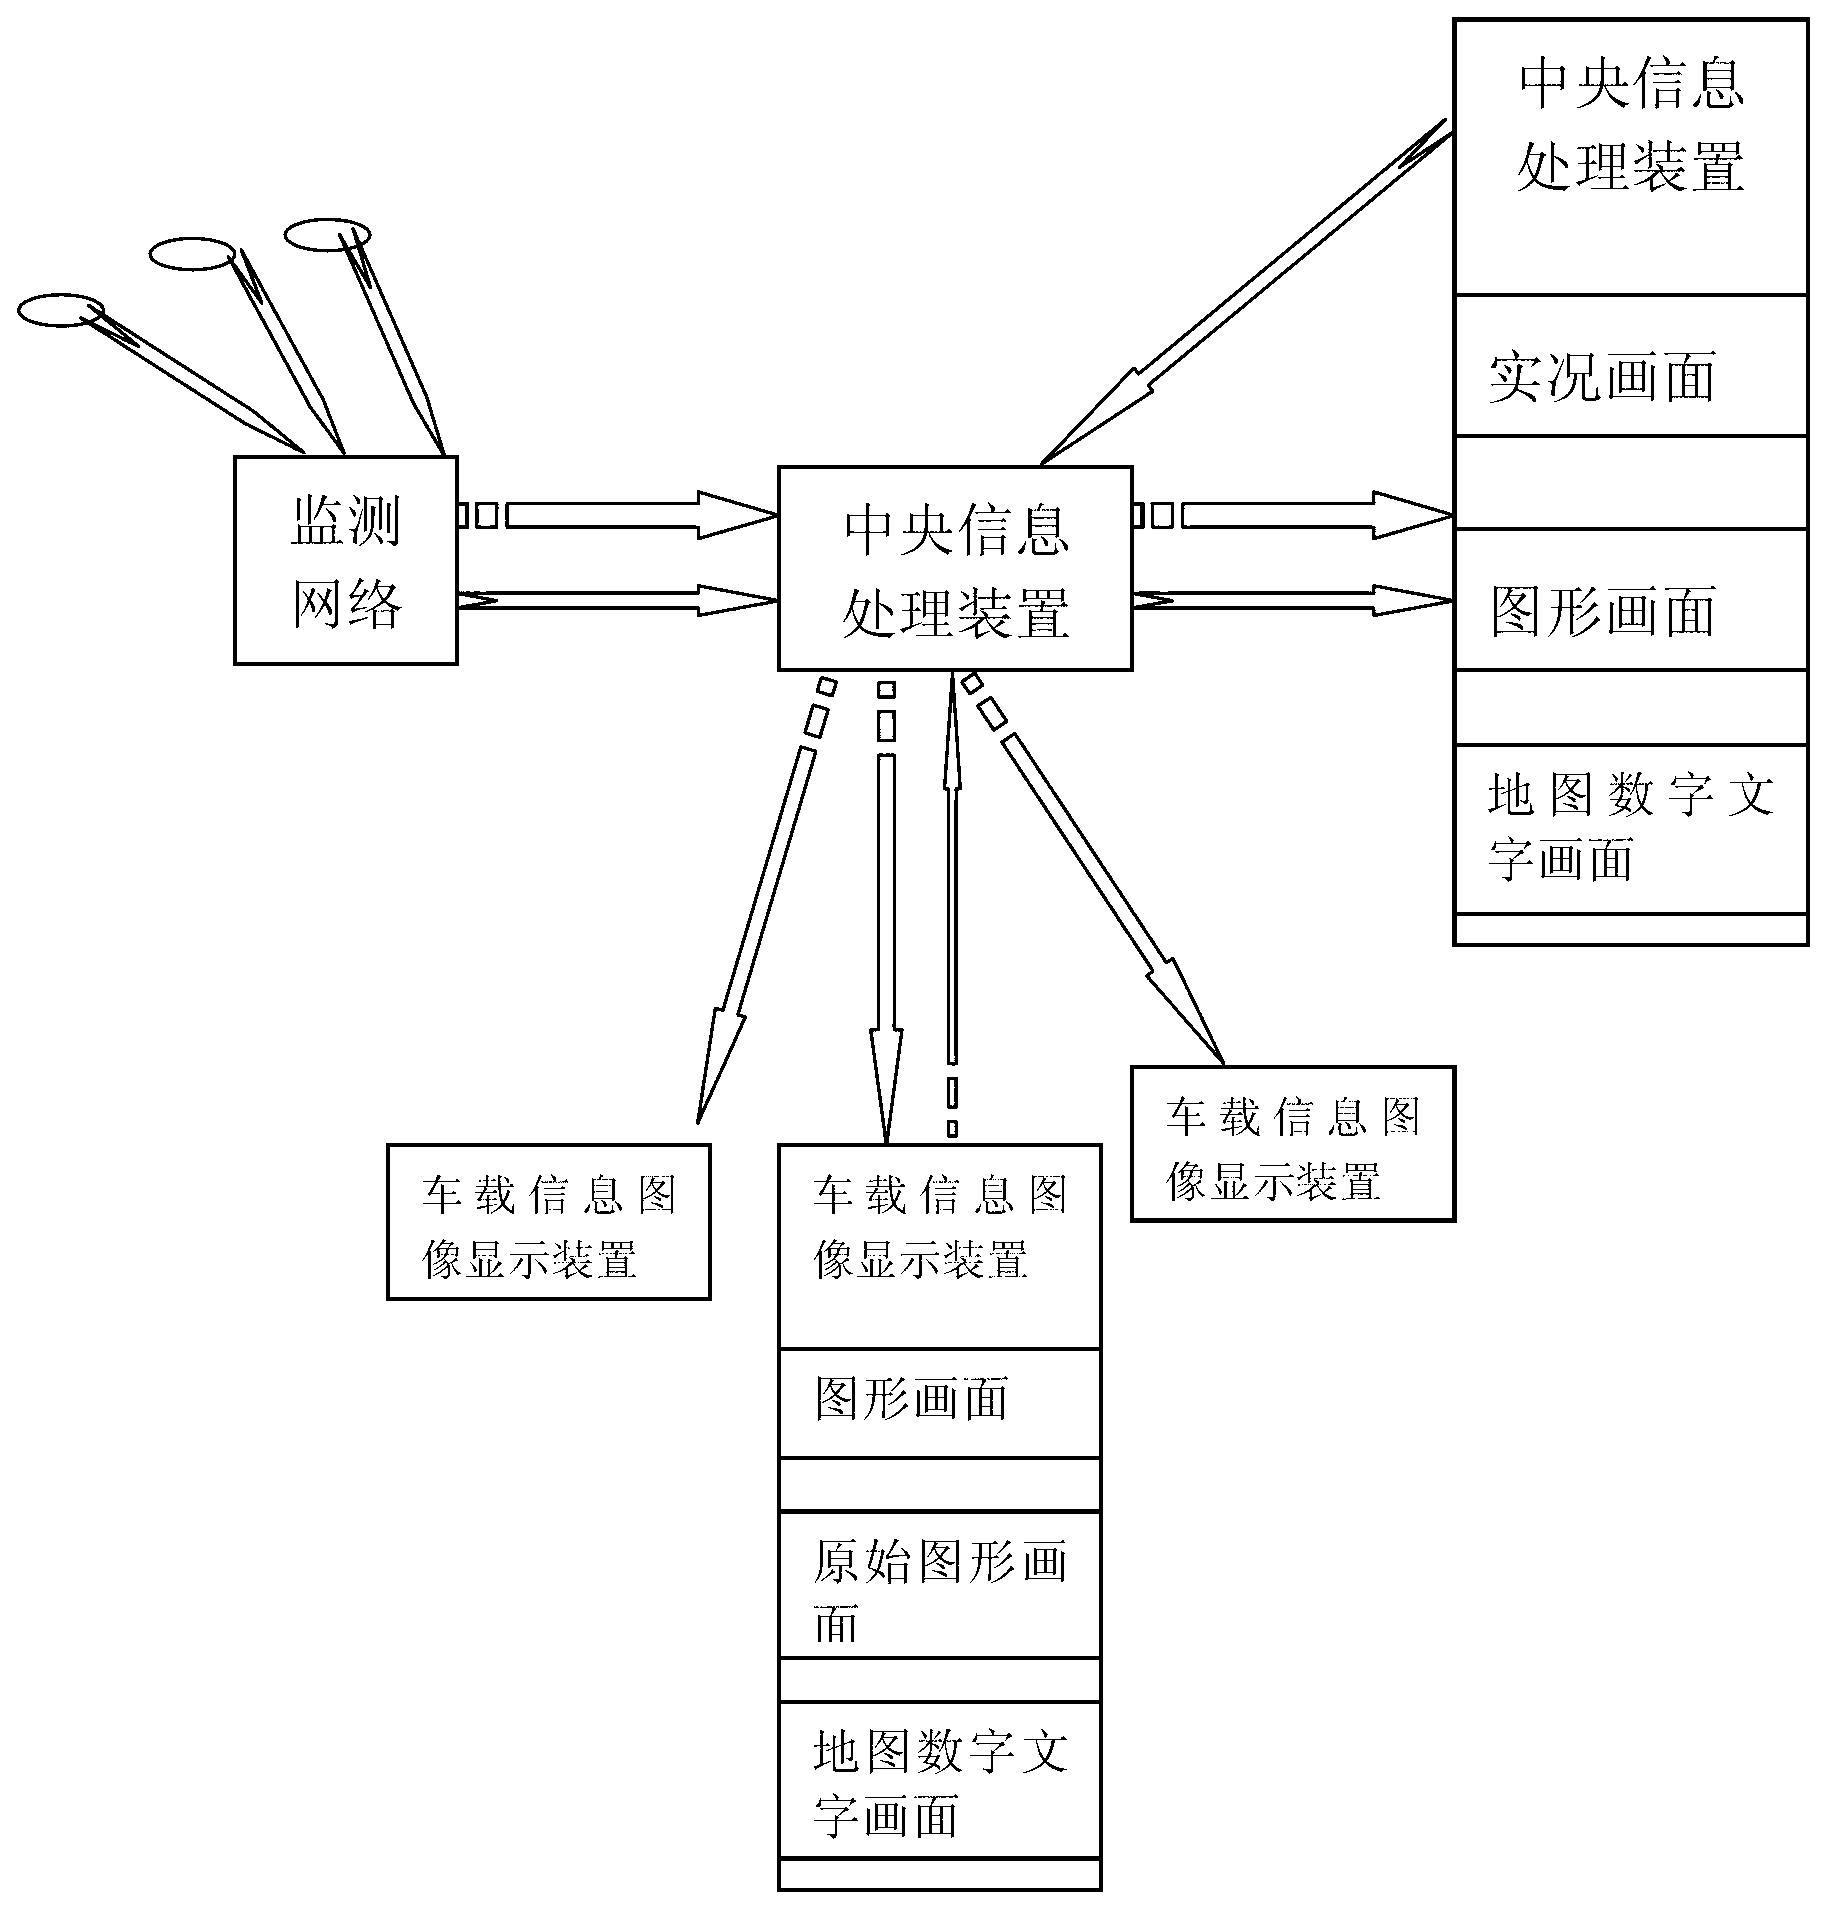 System and method for operation of traffic information